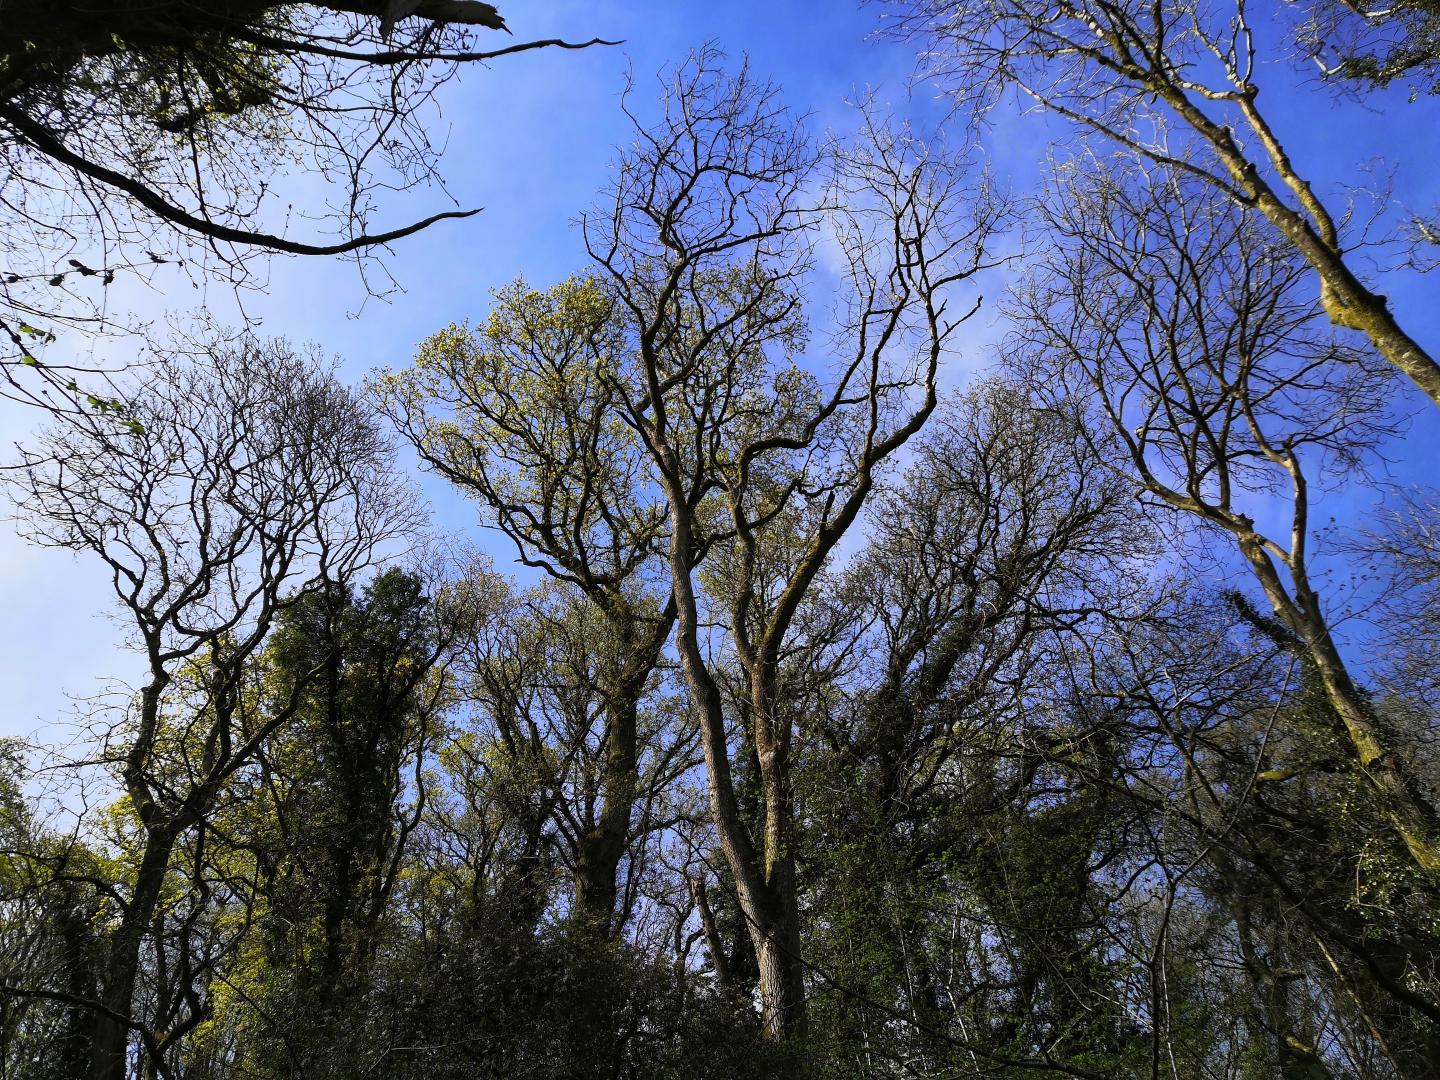 Ash trees with ash die back